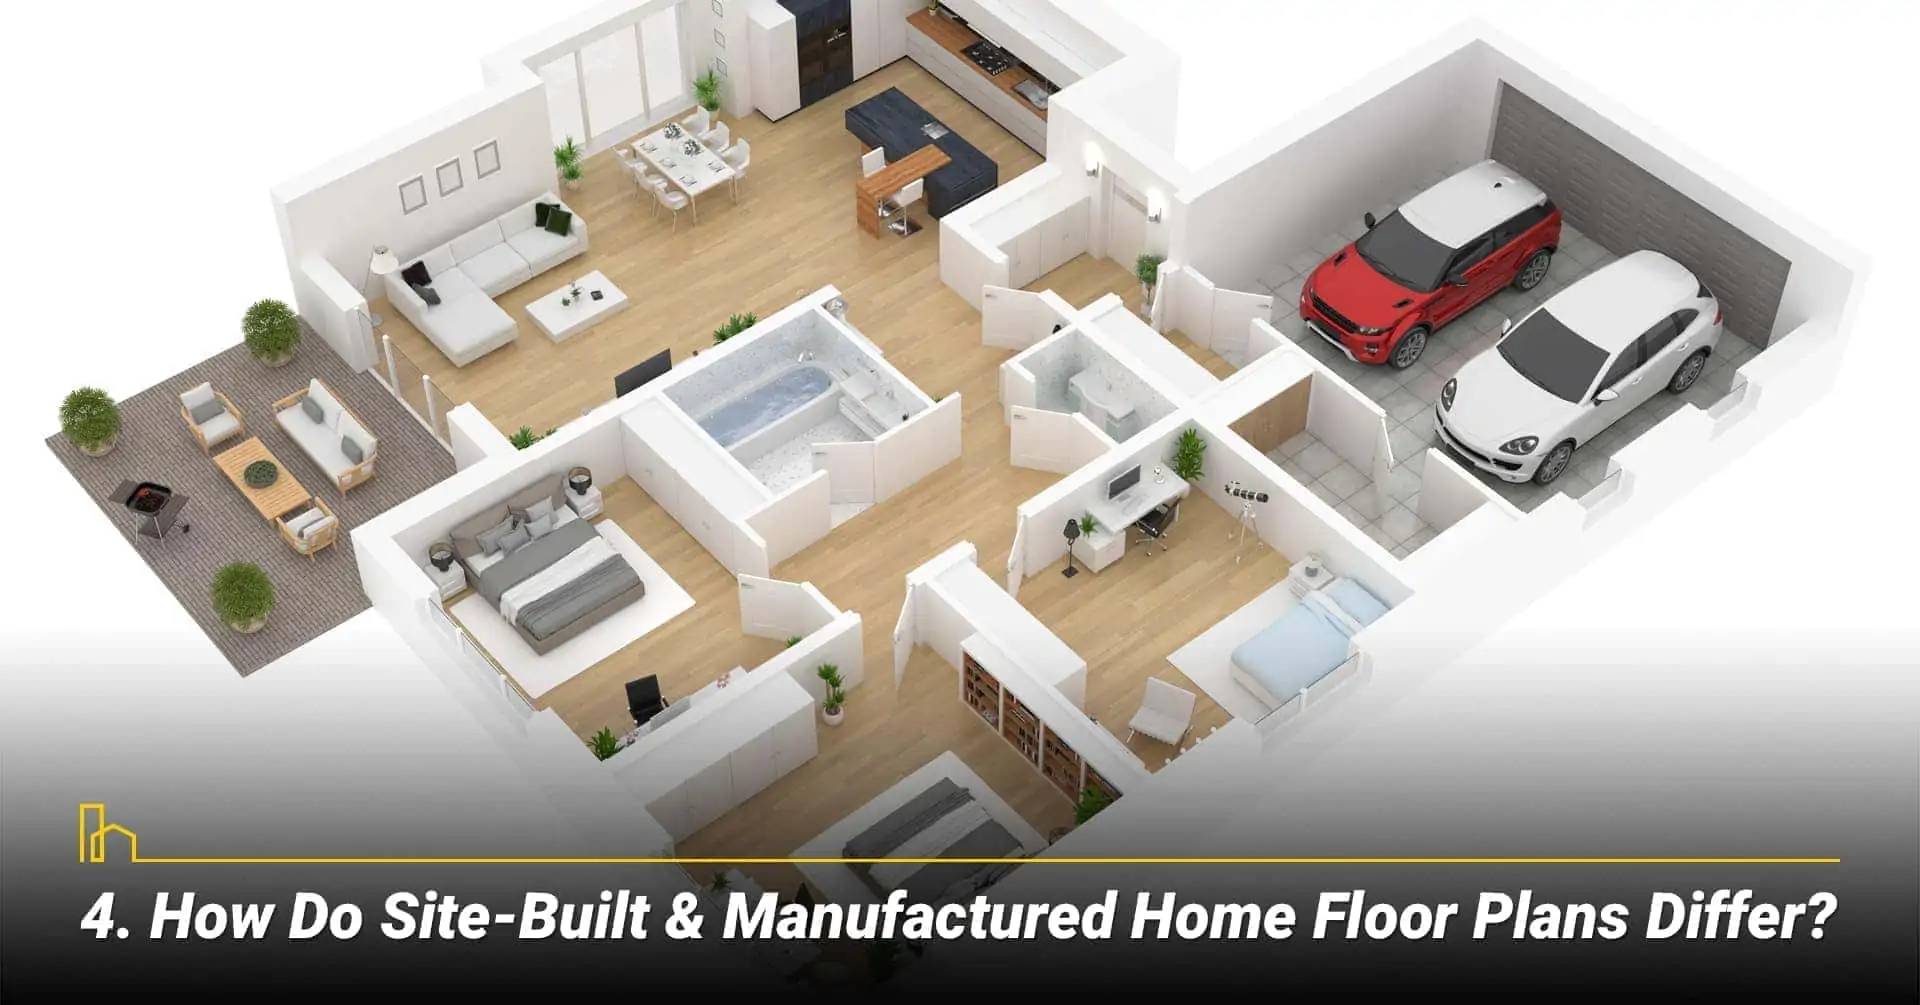 How Do Site-Built & Manufactured Home Floor Plans Differ? floor plans for site-built and manufactured homes